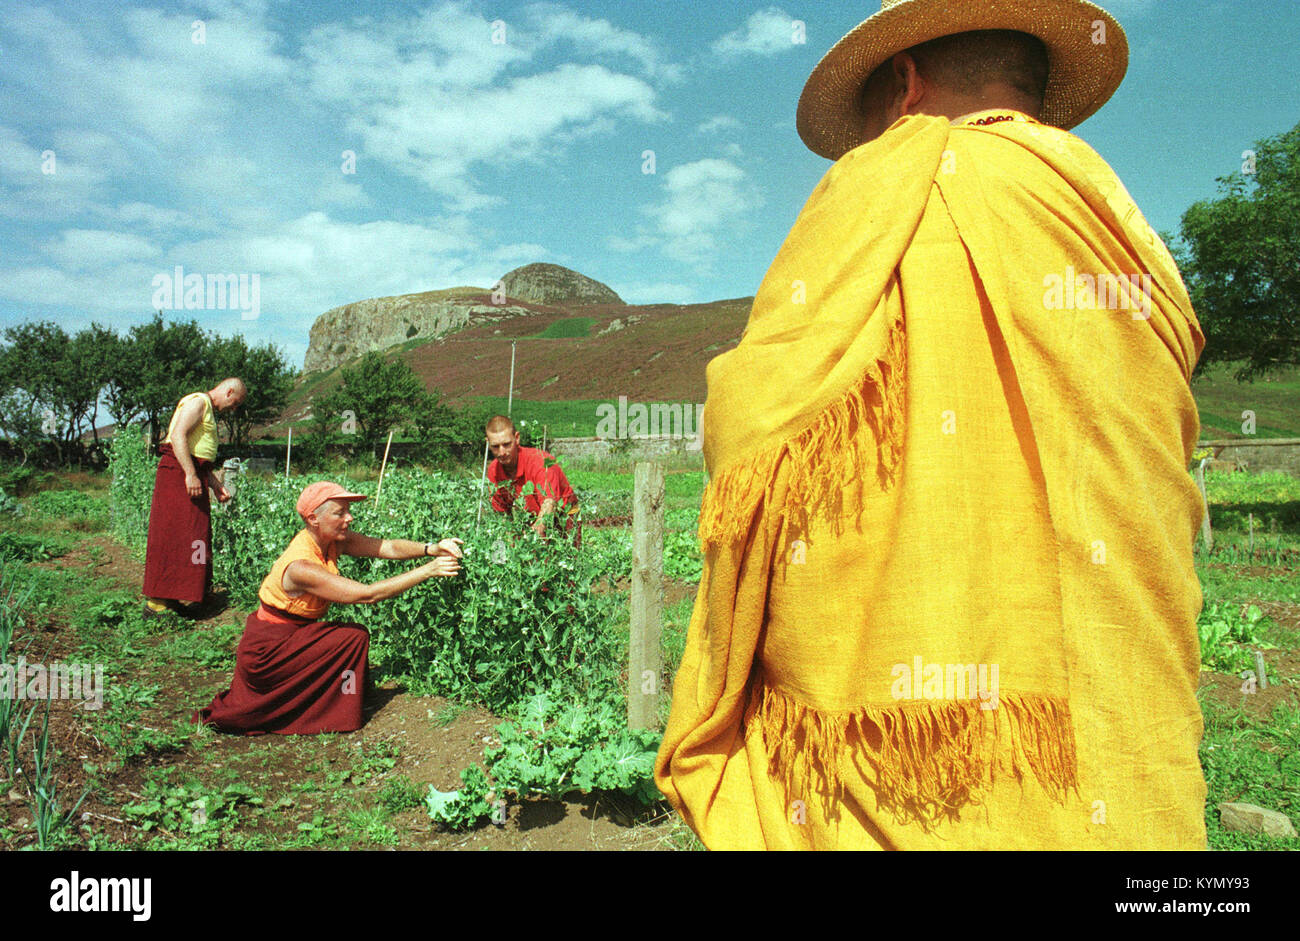 A Buddhist lama supervising visiting monks and nuns gardening at the Holy Island on Scotland's west coast. The island, situated off the coast of the neighbouring island of Arran, was owned by the Samye Ling community based at Eskdalemuir in Dumfries and Galloway. It was purchased in the 1990s and an inter-faith community centre was built and opened on the island in 2003. Stock Photo